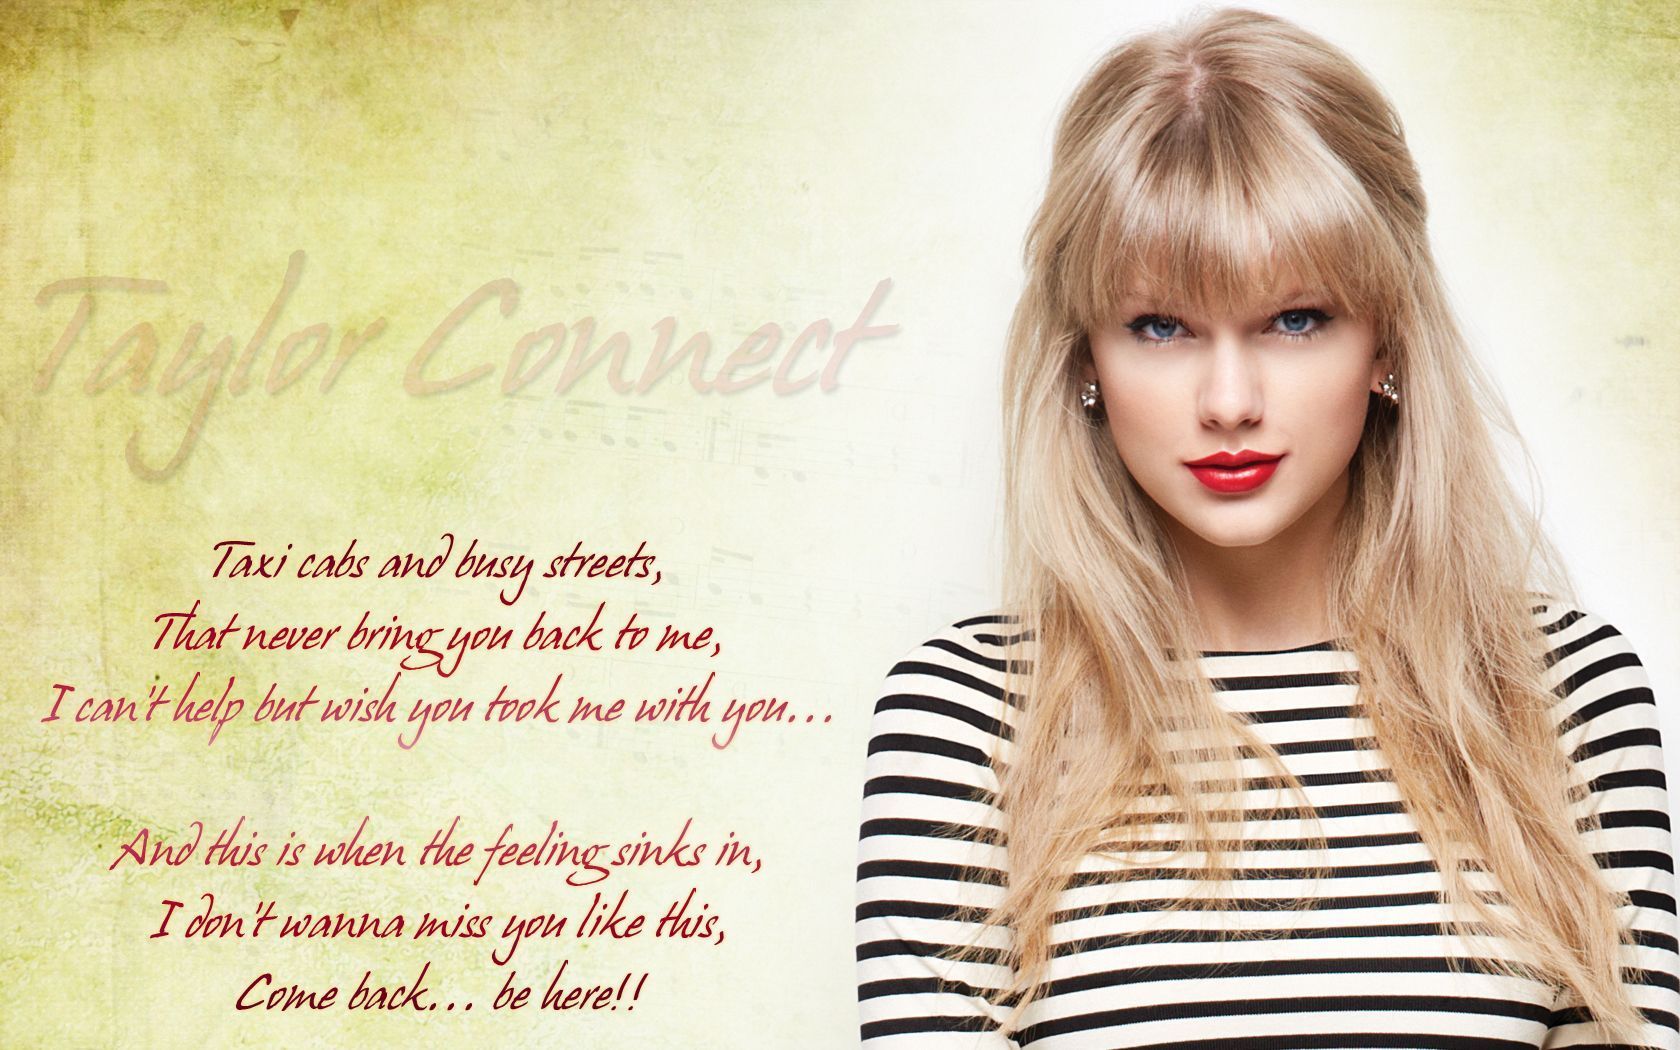 My RED Wallpapers of Taylor -- updated 03 30 13 : Taylor Swift